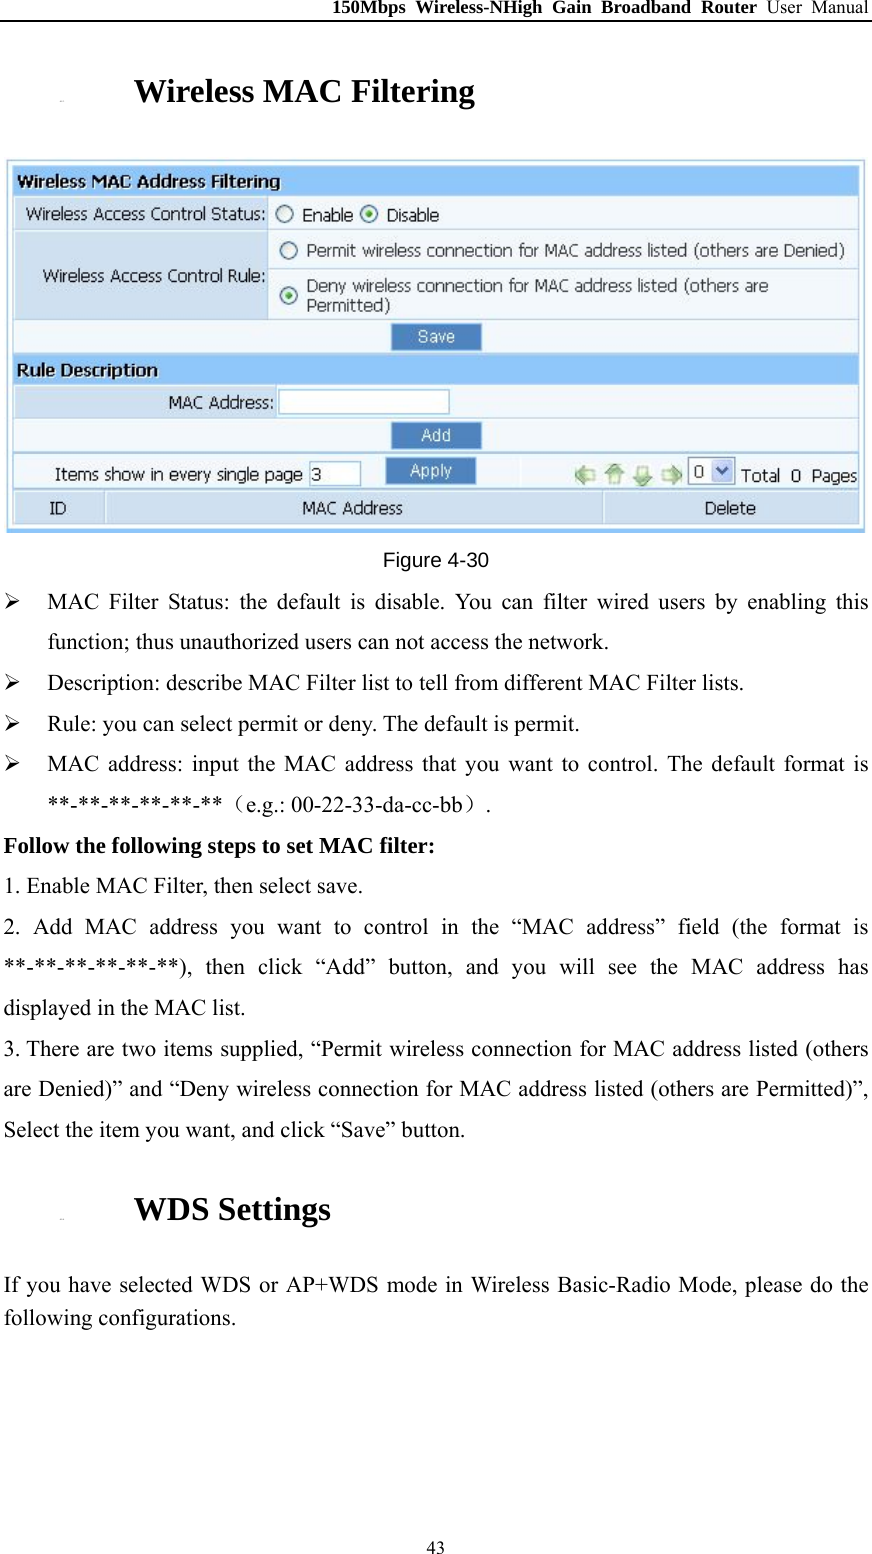 150Mbps Wireless-NHigh Gain Broadband Router User Manual 4.5.3. Wireless MAC Filtering  Figure 4-30  MAC Filter Status: the default is disable. You can filter wired users by enabling this function; thus unauthorized users can not access the network.  Description: describe MAC Filter list to tell from different MAC Filter lists.  Rule: you can select permit or deny. The default is permit.  MAC address: input the MAC address that you want to control. The default format is **-**-**-**-**-**（e.g.: 00-22-33-da-cc-bb）. Follow the following steps to set MAC filter:   1. Enable MAC Filter, then select save. 2. Add MAC address you want to control in the “MAC address” field (the format is **-**-**-**-**-**), then click “Add” button, and you will see the MAC address has displayed in the MAC list. 3. There are two items supplied, “Permit wireless connection for MAC address listed (others are Denied)” and “Deny wireless connection for MAC address listed (others are Permitted)”, Select the item you want, and click “Save” button. 4.5.4. WDS Settings If you have selected WDS or AP+WDS mode in Wireless Basic-Radio Mode, please do the following configurations.  43